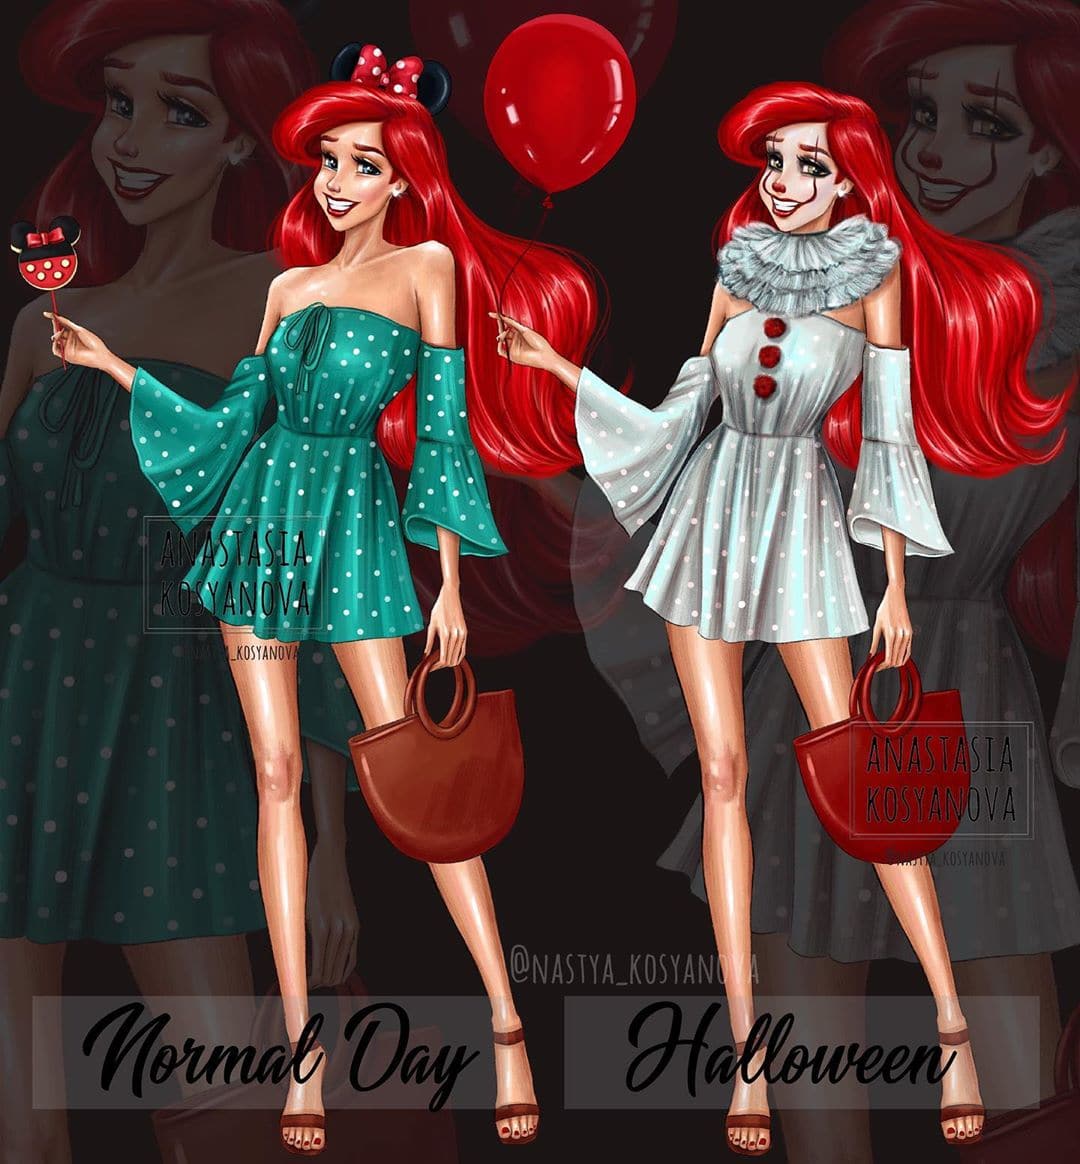 The artist changed the image of Disney princesses and added Halloween horror to them